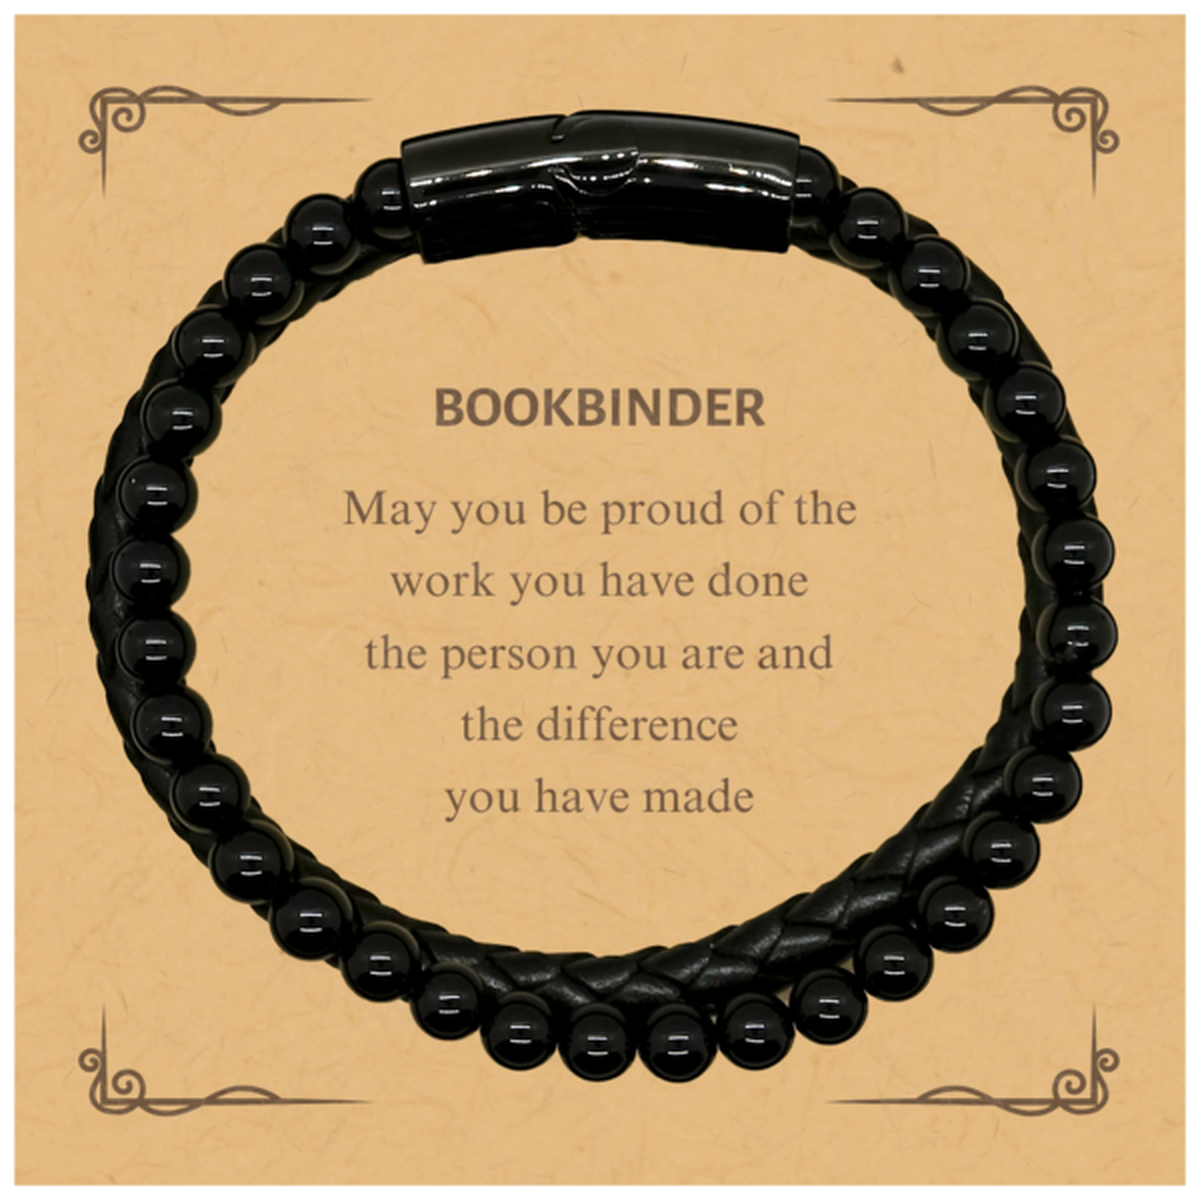 Bookbinder May you be proud of the work you have done, Retirement Bookbinder Stone Leather Bracelets for Colleague Appreciation Gifts Amazing for Bookbinder